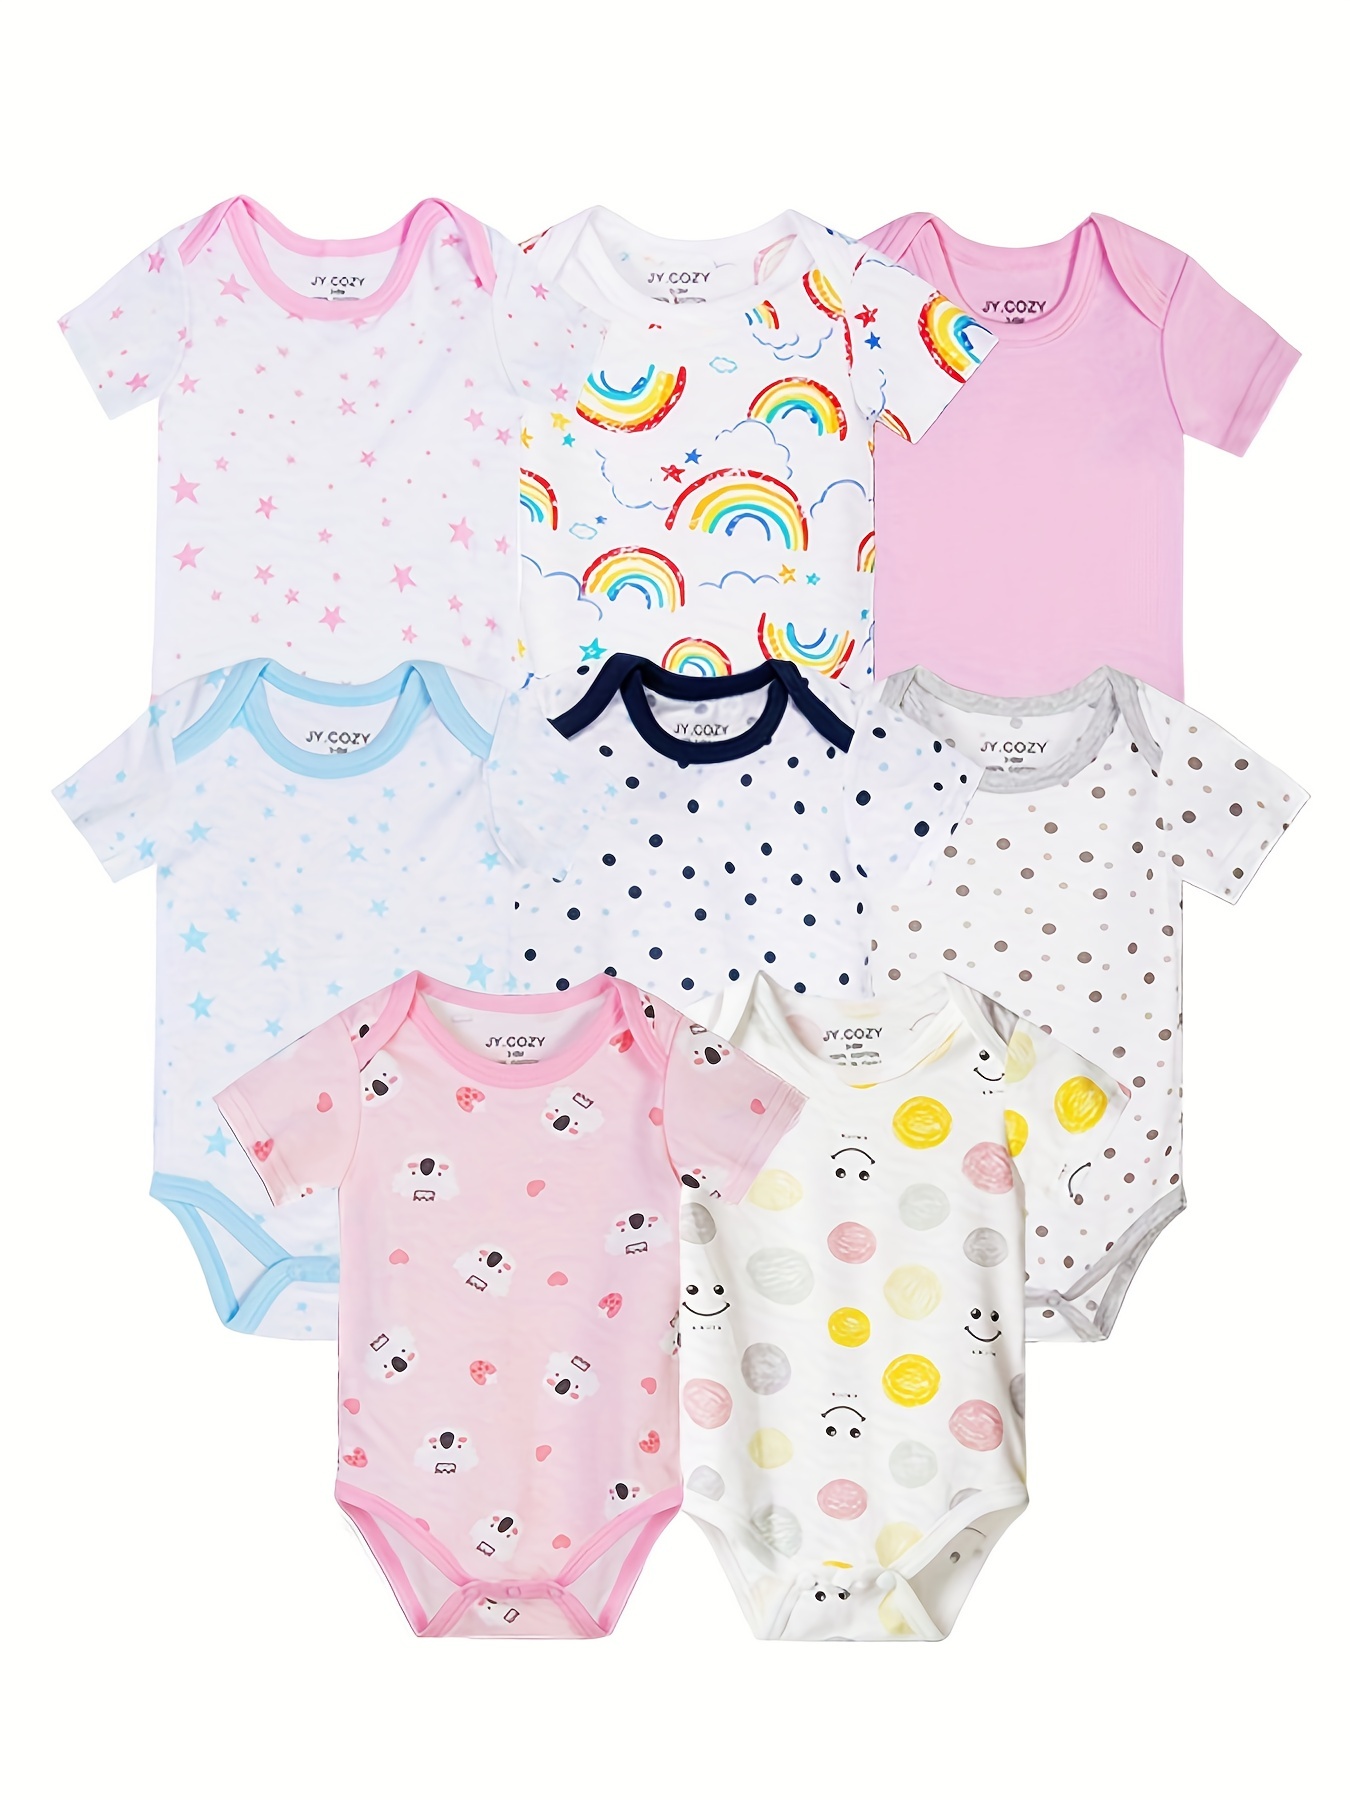 8pcs Newborn Baby Girls Cotton Comfy & Cute Print Rompers, Perfect For Pregnancy Gifts